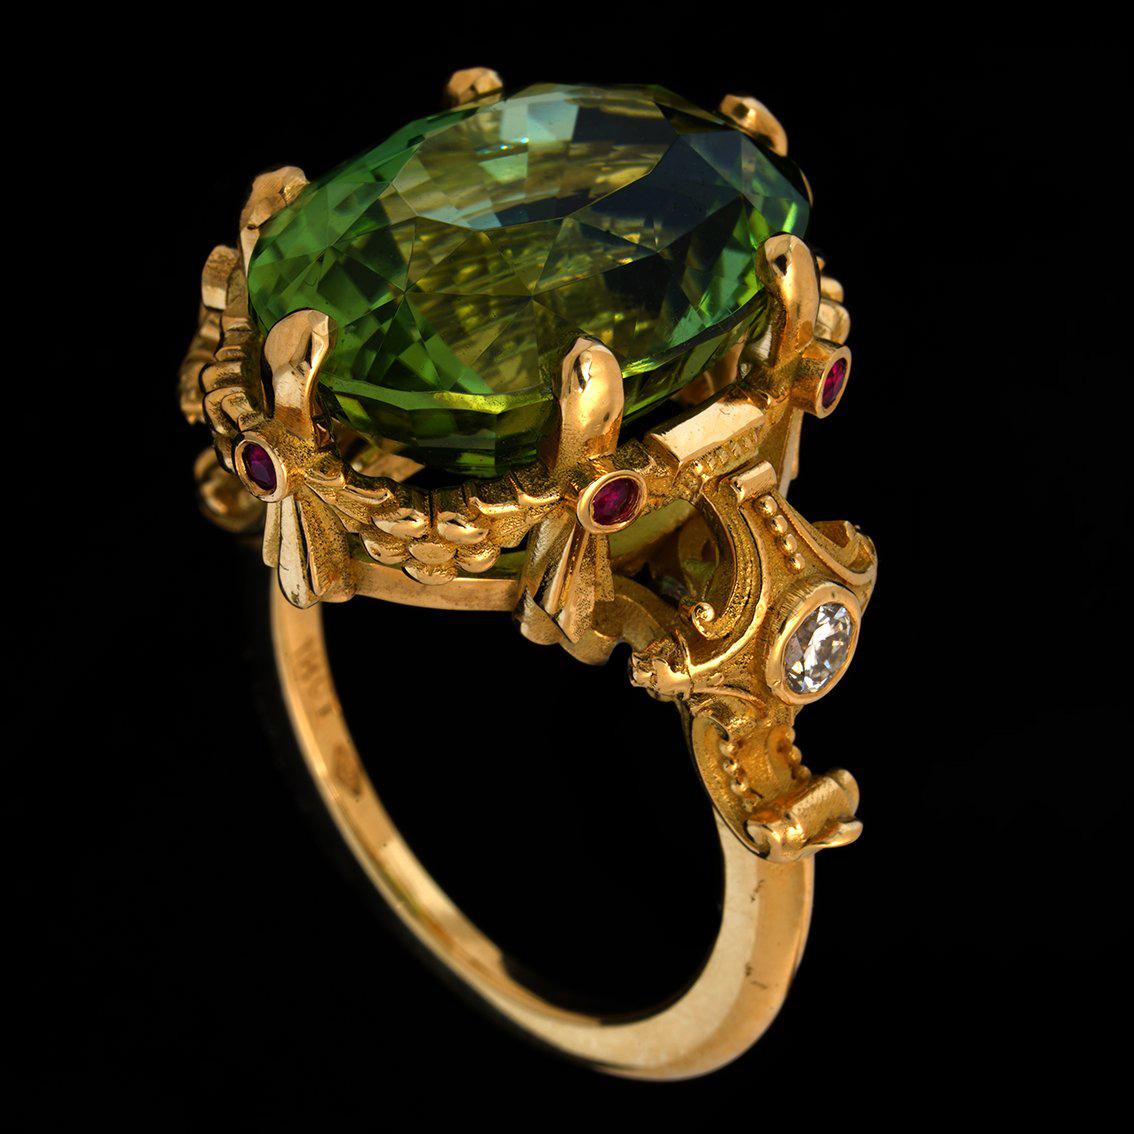 21ct Green Tourmaline, Rubies, Diamonds, & 18k Yellow Gold Antique Style Ring For Sale 6